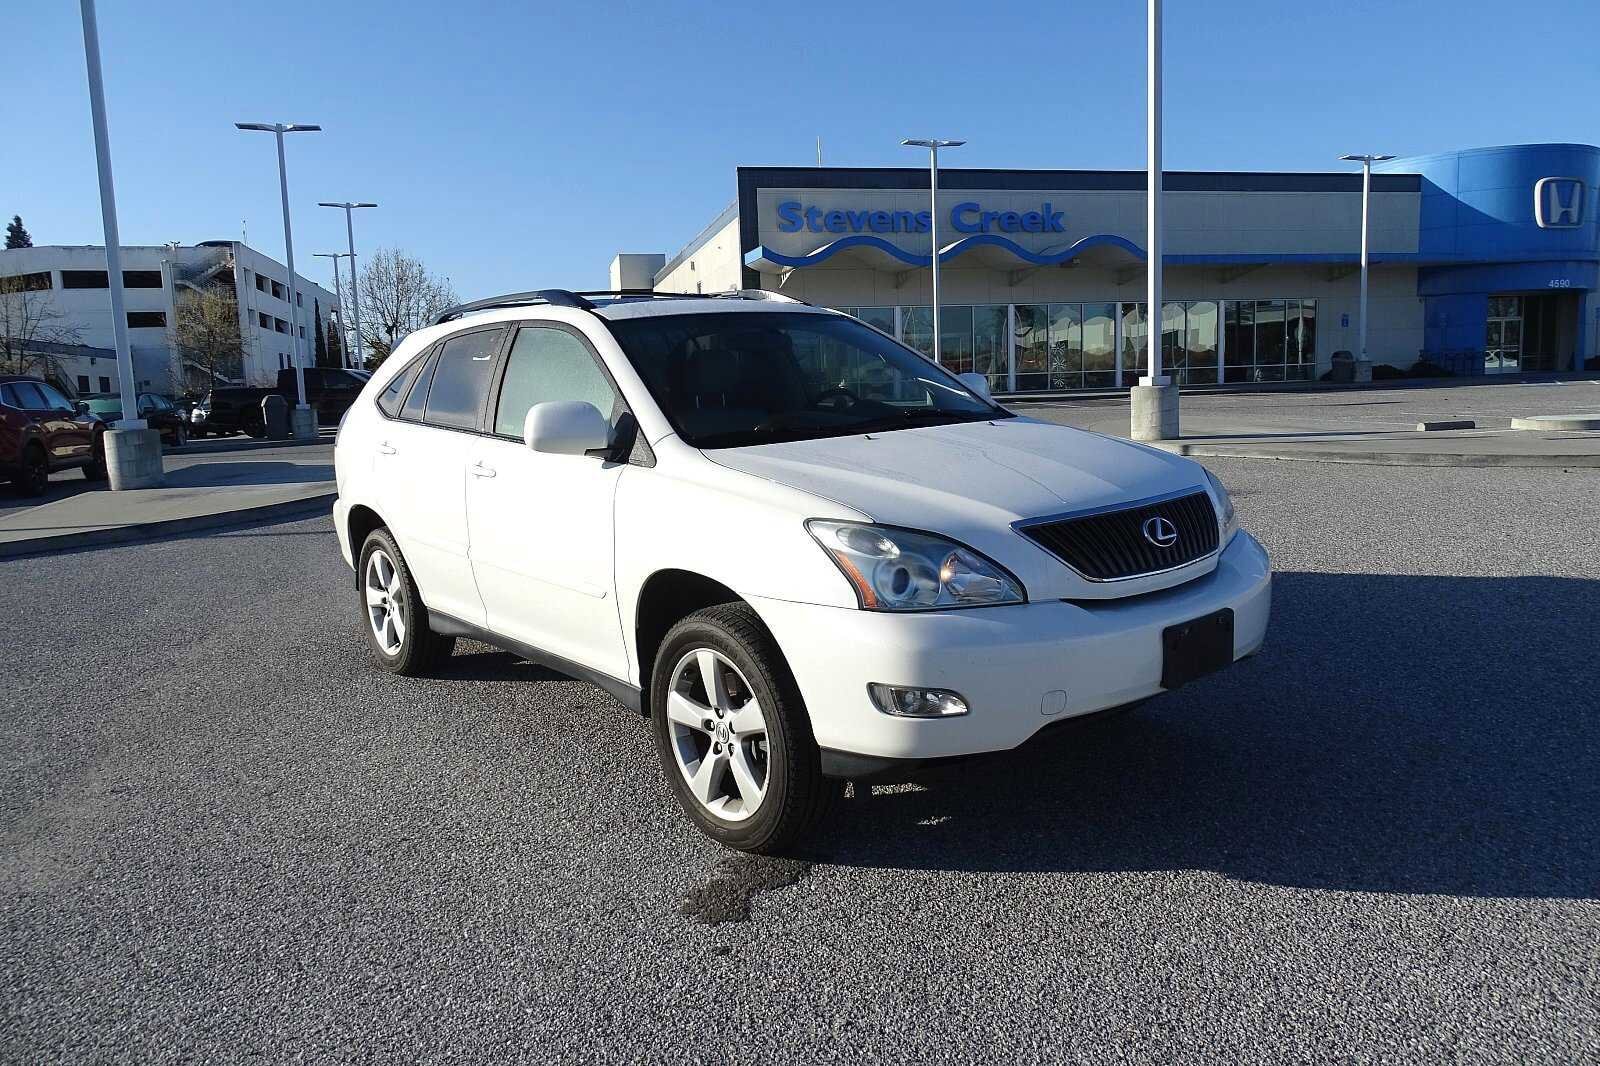 Used 2006 LEXUS RX 330 Base For Sale in San Jose CA | Stock# P60063829